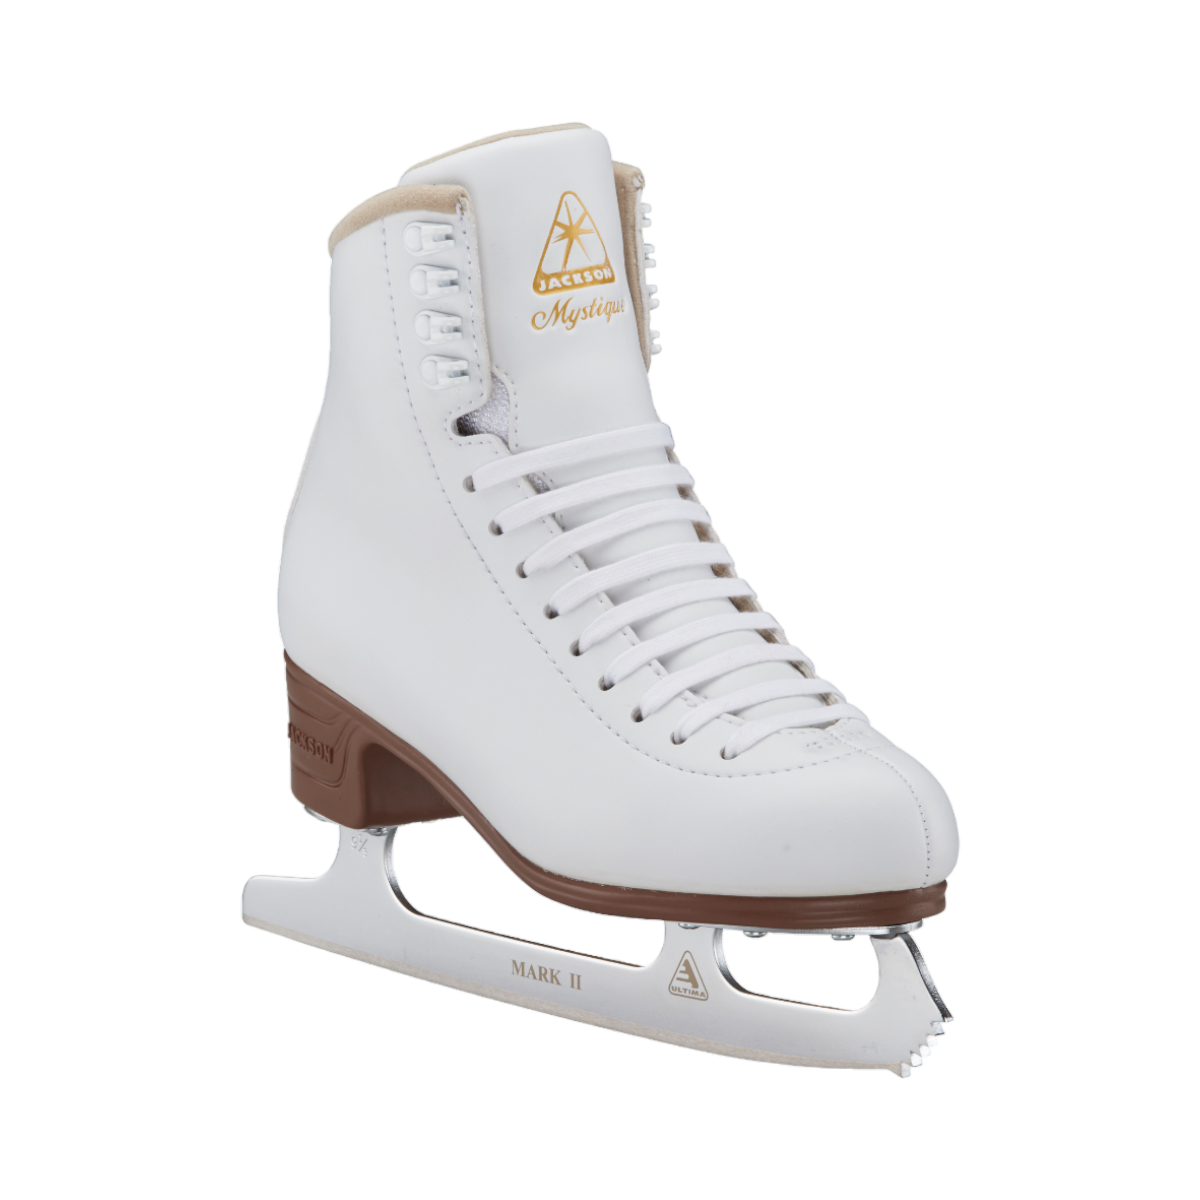 What Are the Best Ice Skates for Competitive Skaters? - Riedell Ice